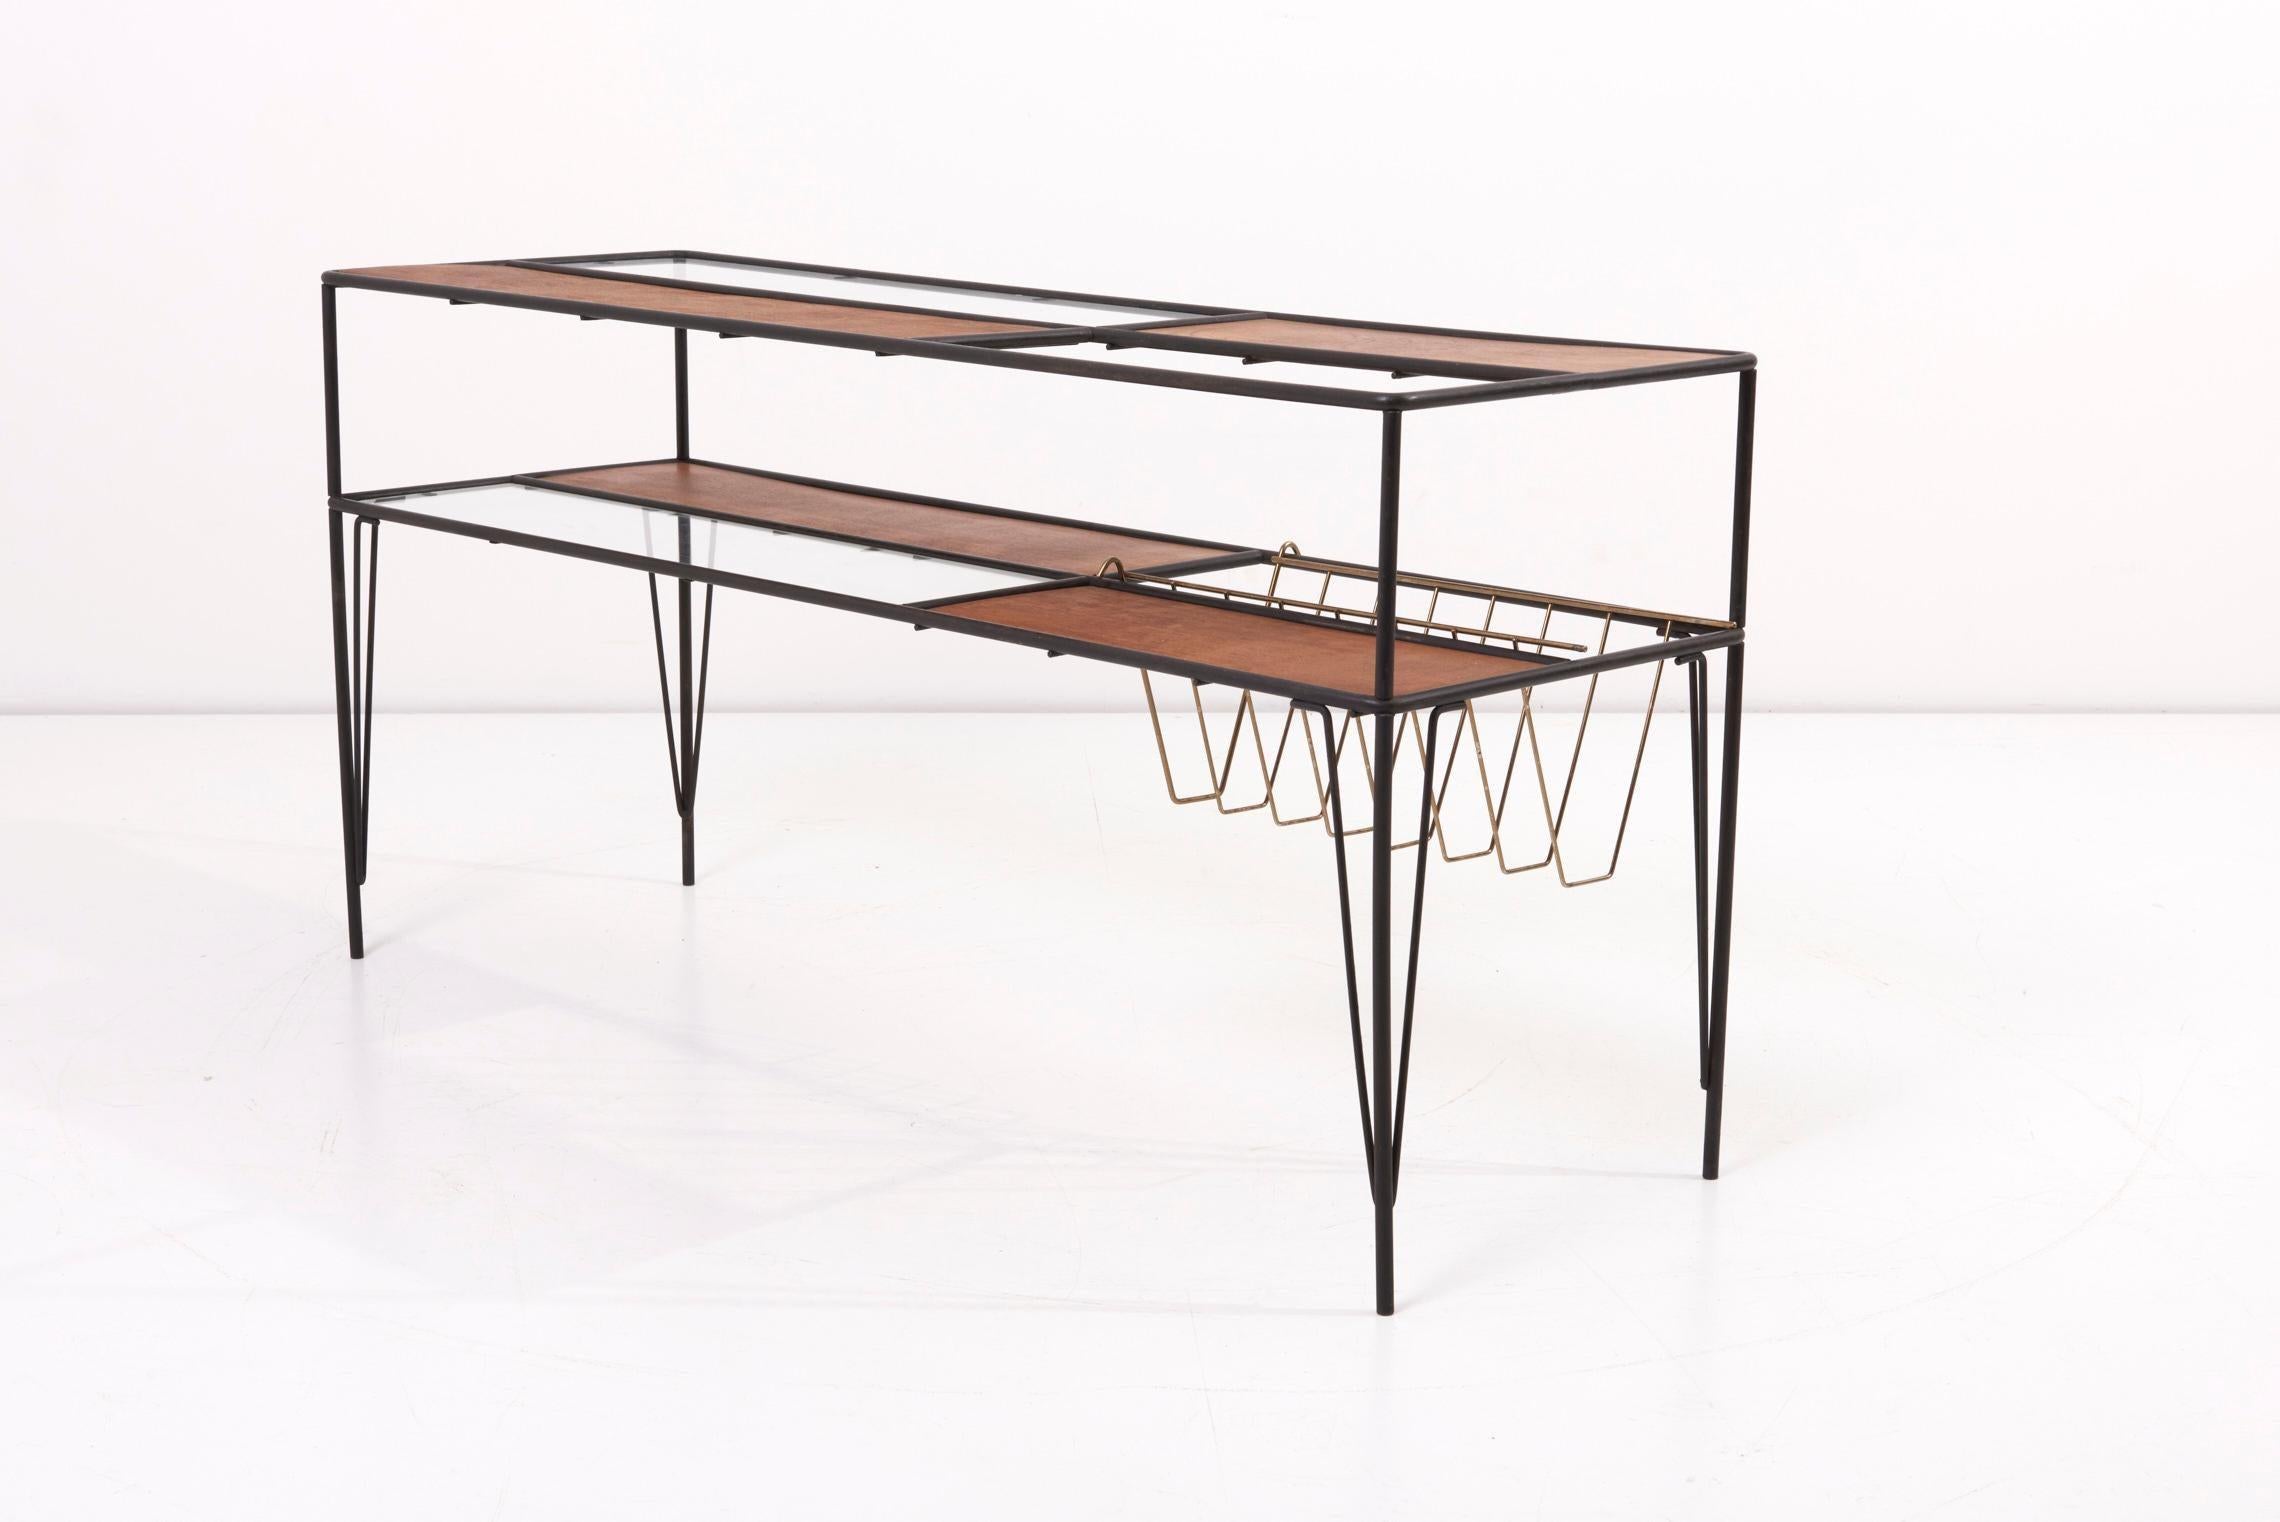 Modernist Magazine Rack or Side Coffee Table in Metal, Wood and Glass, US 1950s For Sale 6